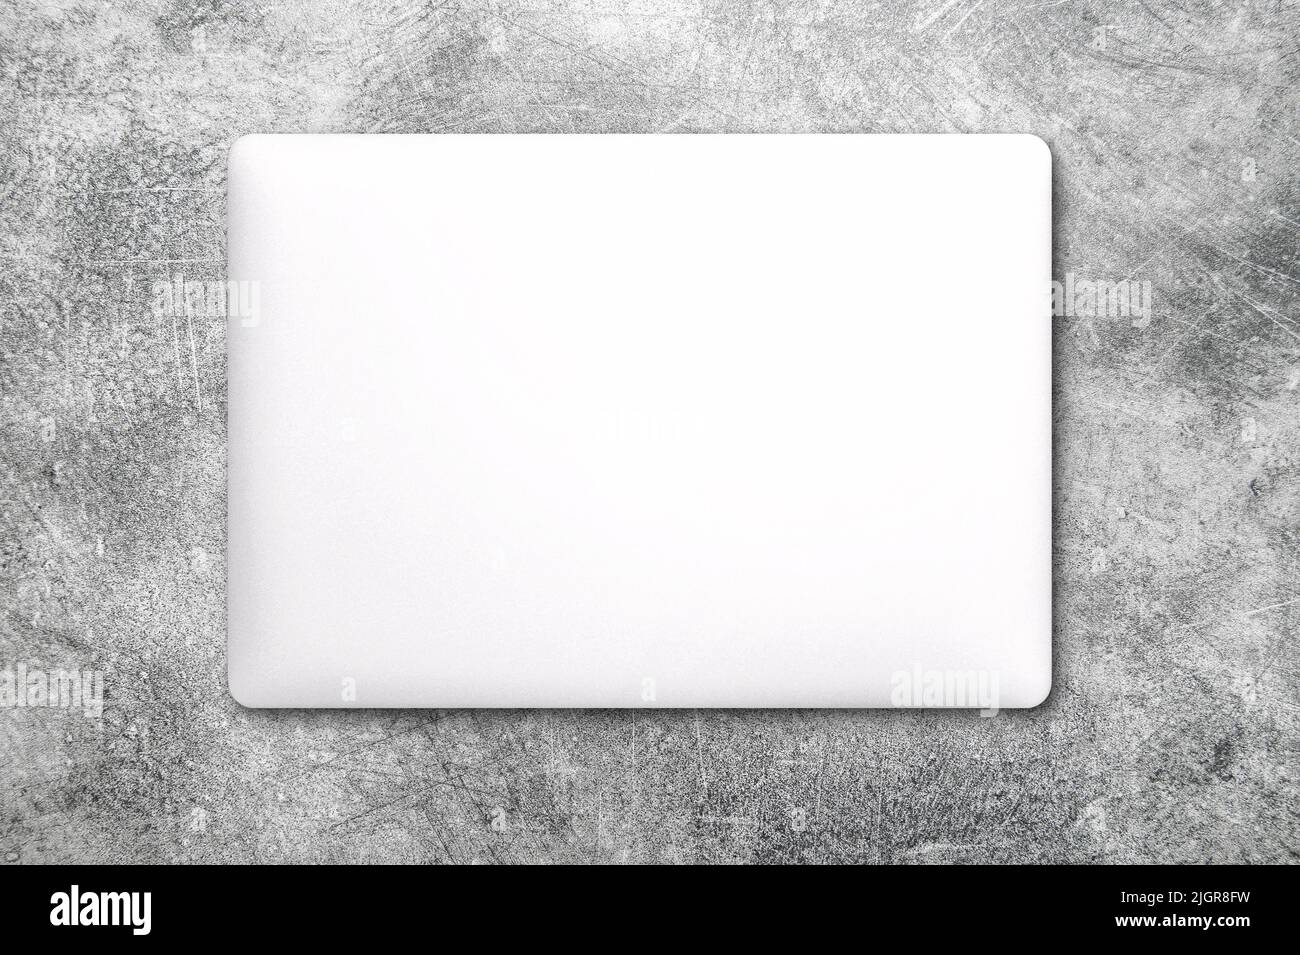 Laptop mock up on marble background. Office workspace flat lay Stock Photo